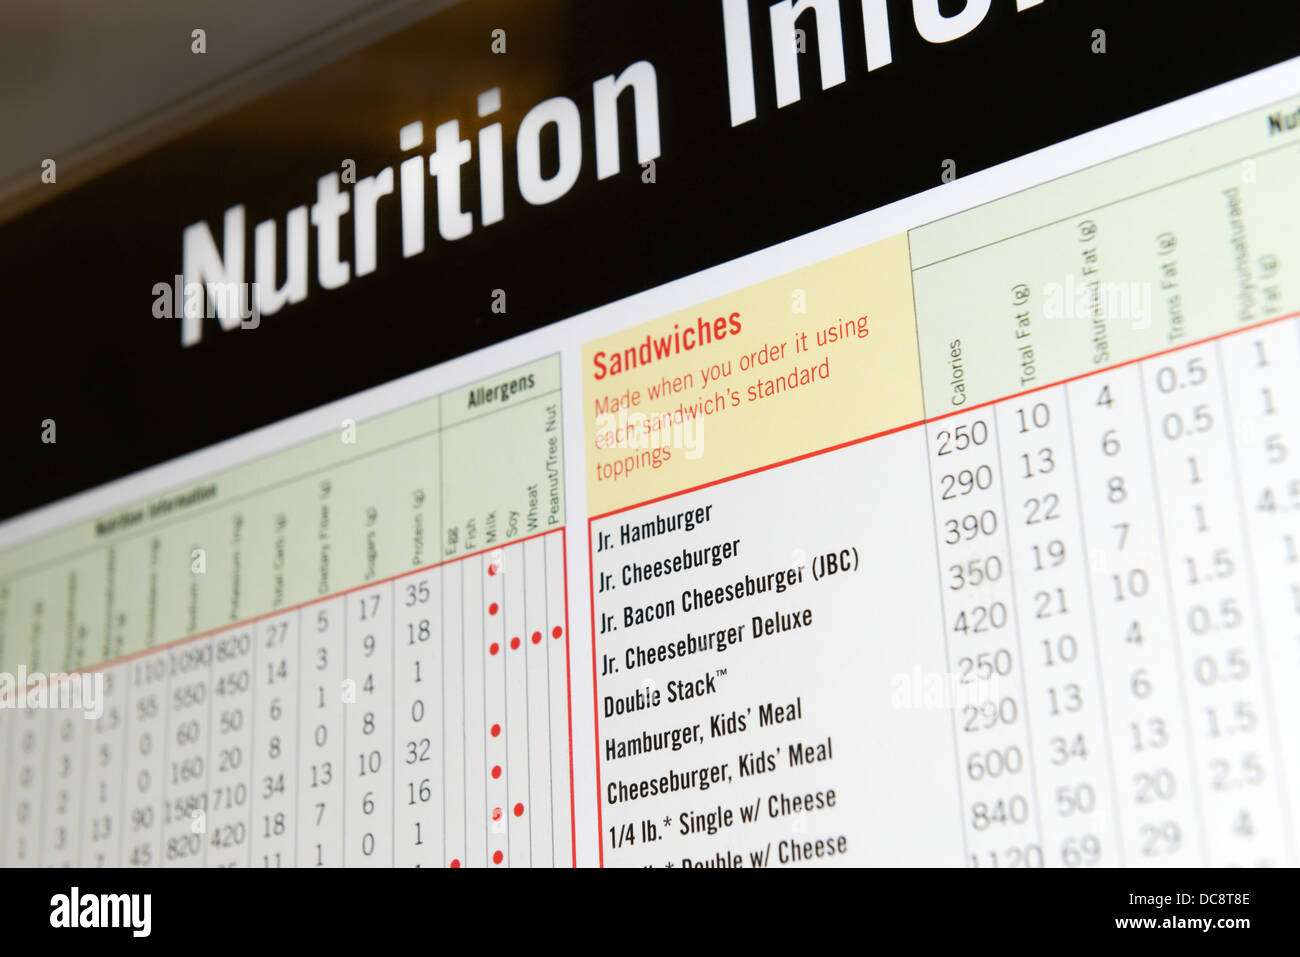 Nutrition information posting at a fast food restaurant, NJ, USA Stock Photo